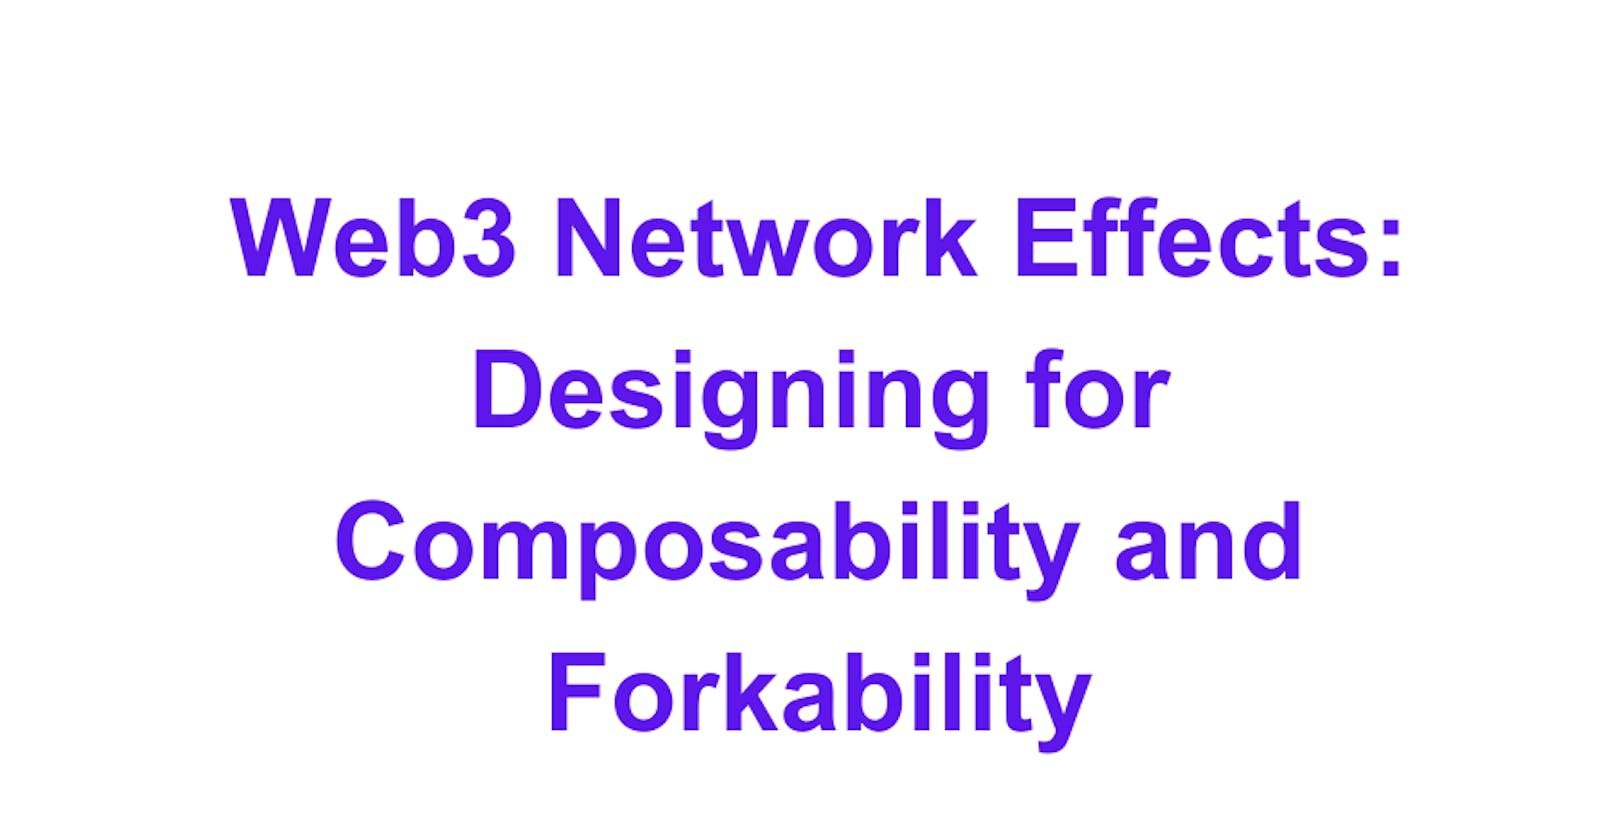 Web3 Network Effects: Designing for Composability and Forkability